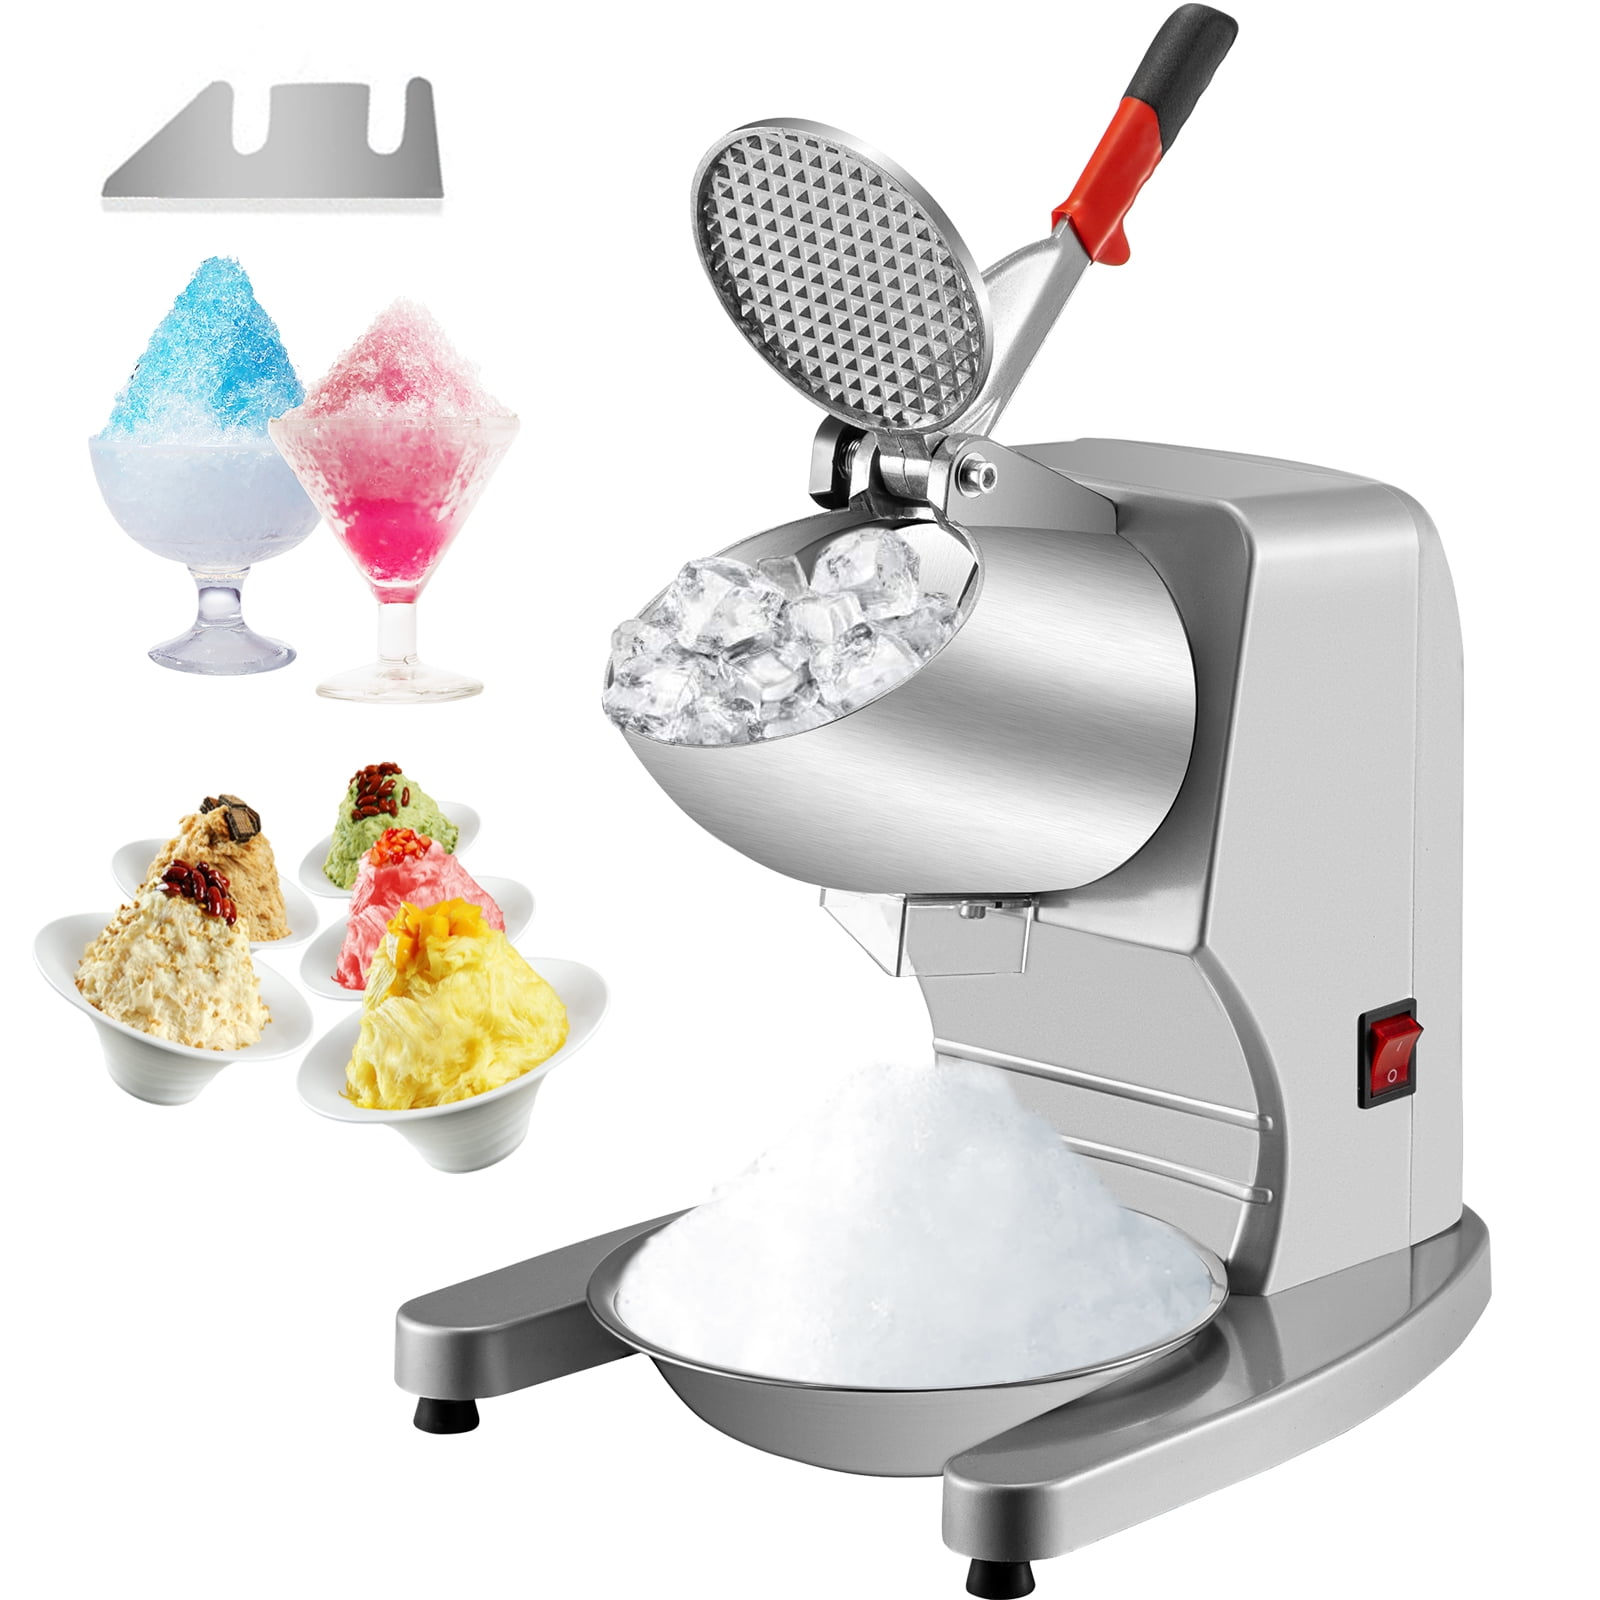 Stainless Steel Electric Snow Cone Machine Ice Shaver Crusher Shaved Shaving Maker w/Acrylic Case for Home Vendors Fast-food Stores Snack Bars Cafes School Canteens Restaurants Carnivals Banquets 